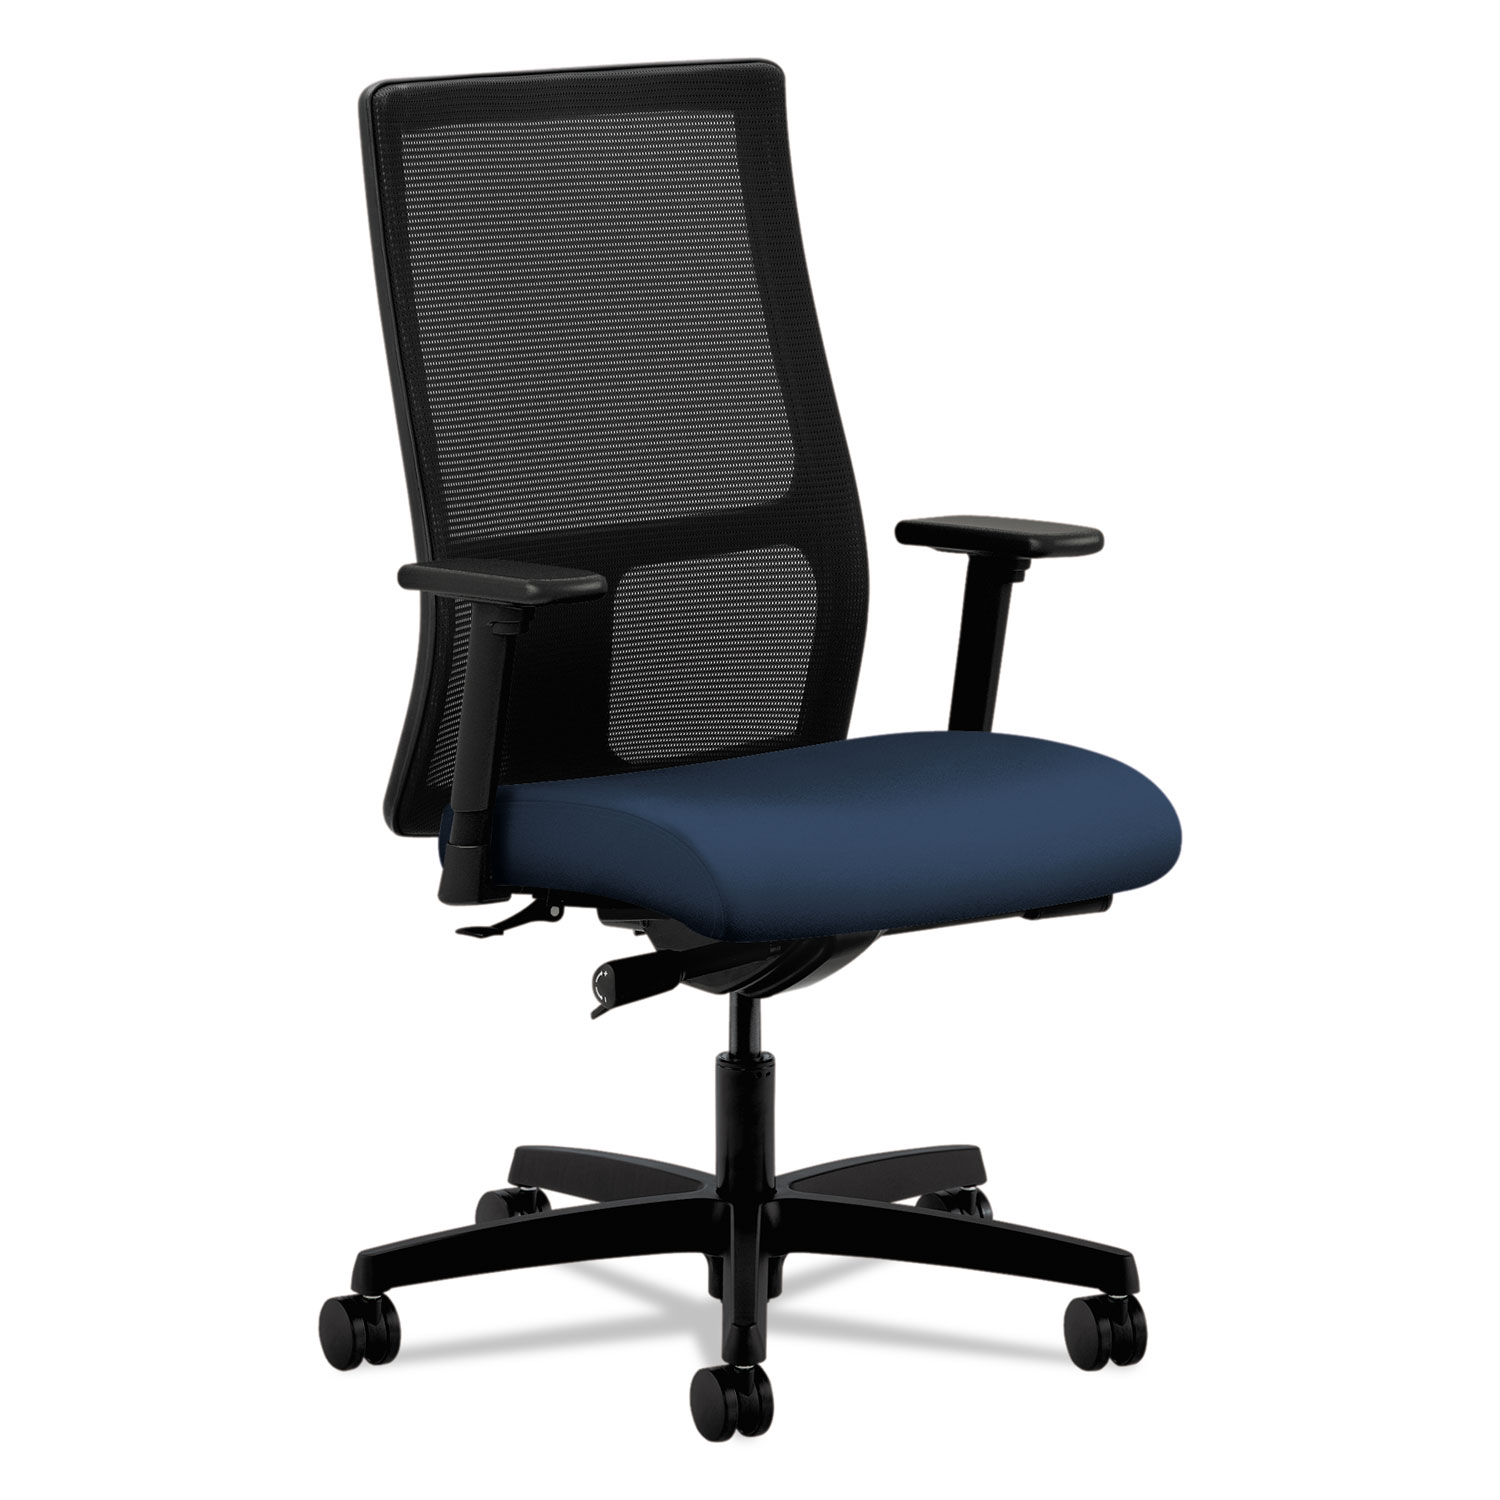  HON HIWM2.A.H.M.CU98.T.SB Ignition Series Mesh Mid-Back Work Chair, Supports up to 300 lbs., Navy Seat/Black Back, Black Base (HONIW103CU98) 